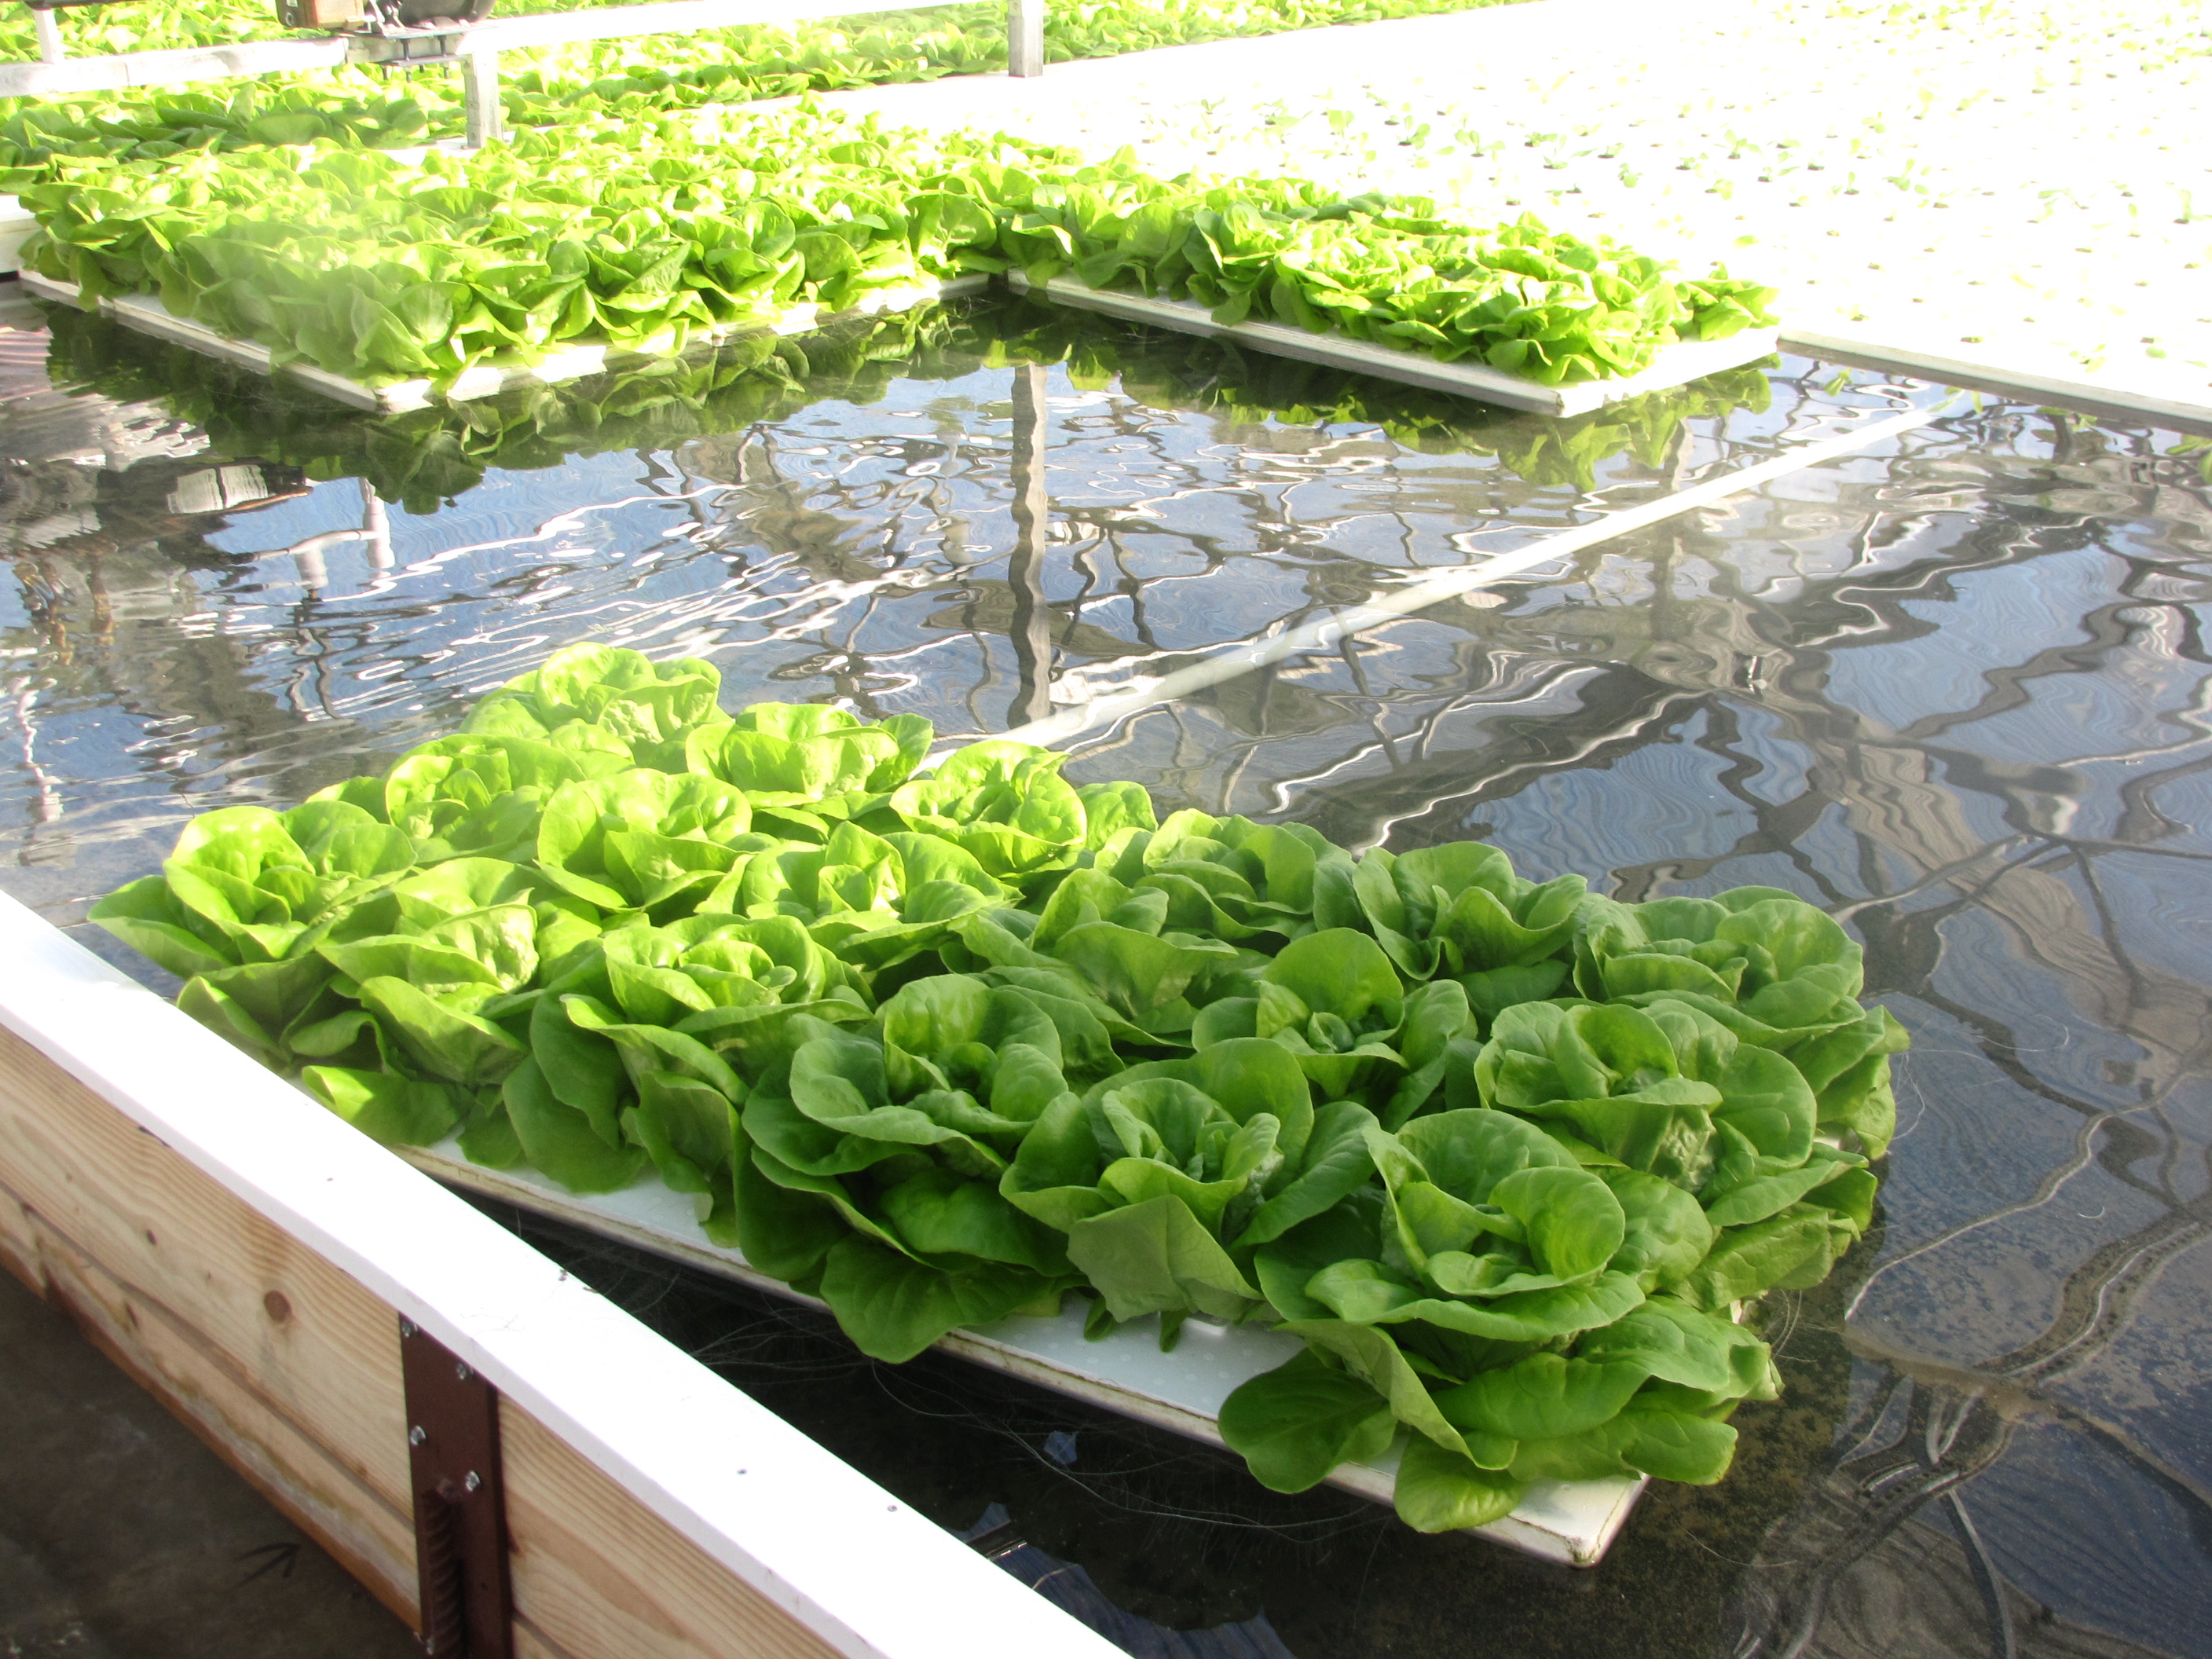 Hydroponic lettuce is being grown at Maple Lane Farm in a facility ...